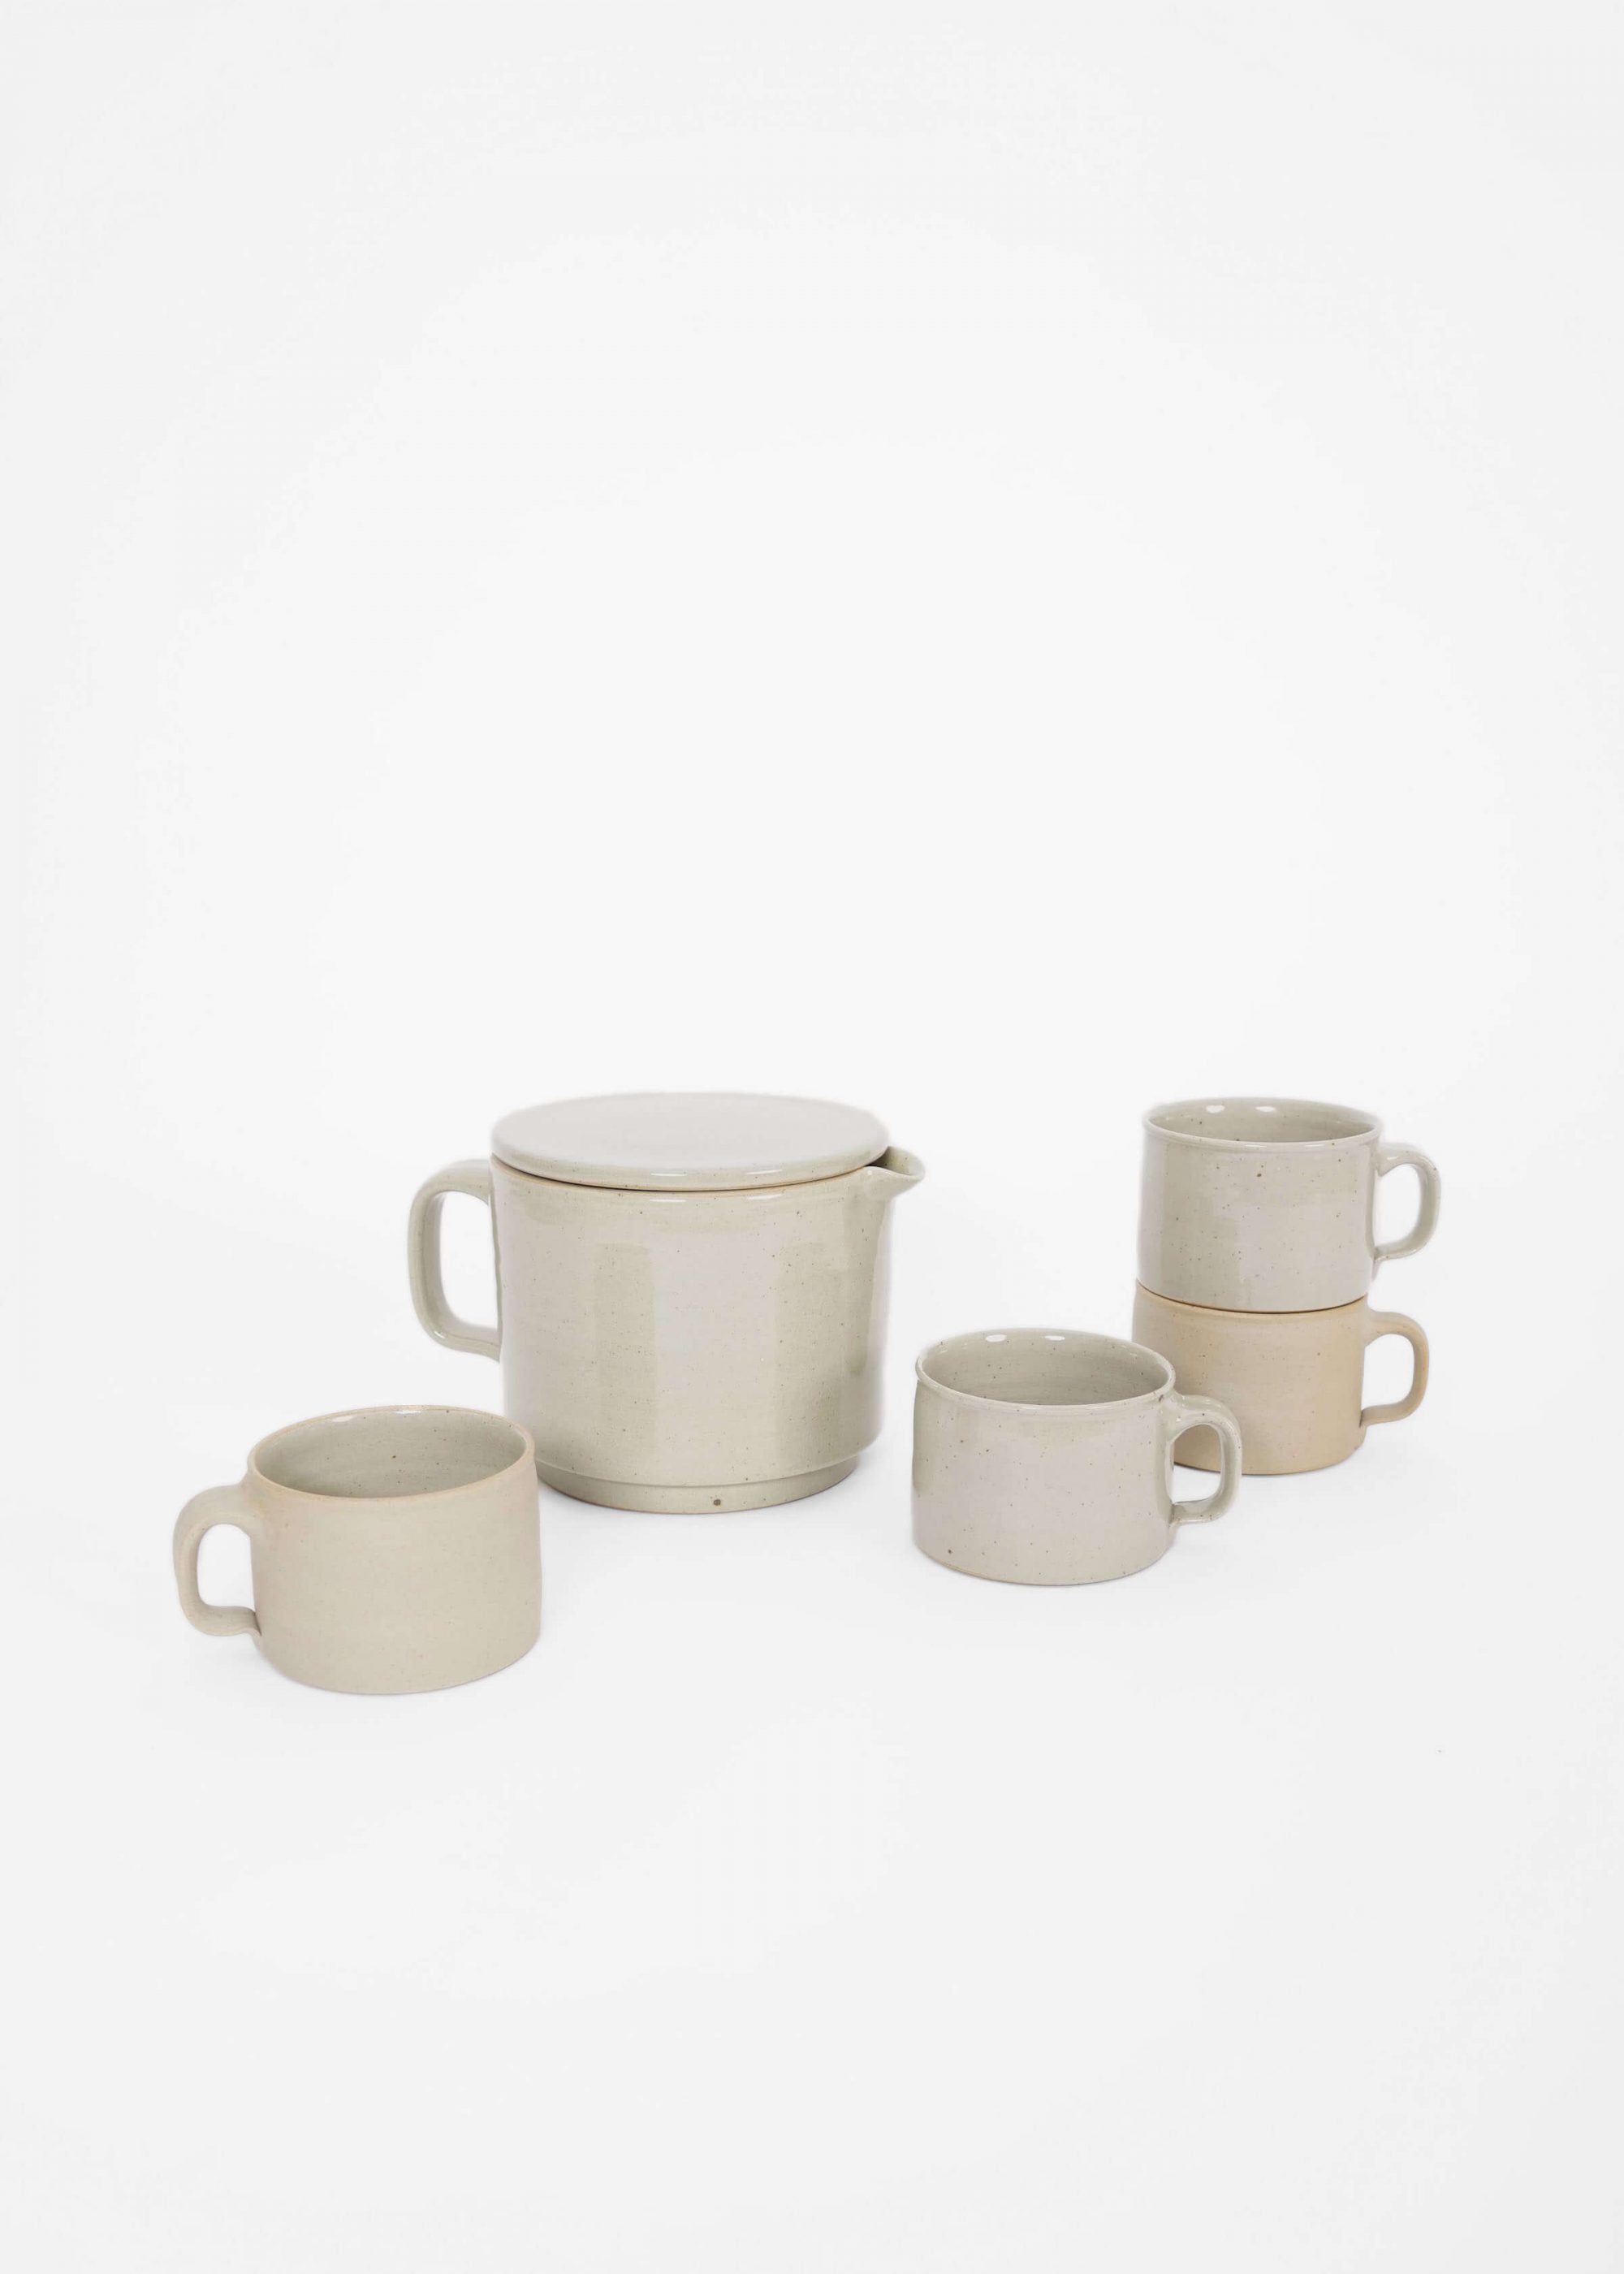 Product image for »Brutal & Beuys« Coffee Set | 1.5 litre Coffee Pot & 4 Mugs / Cups